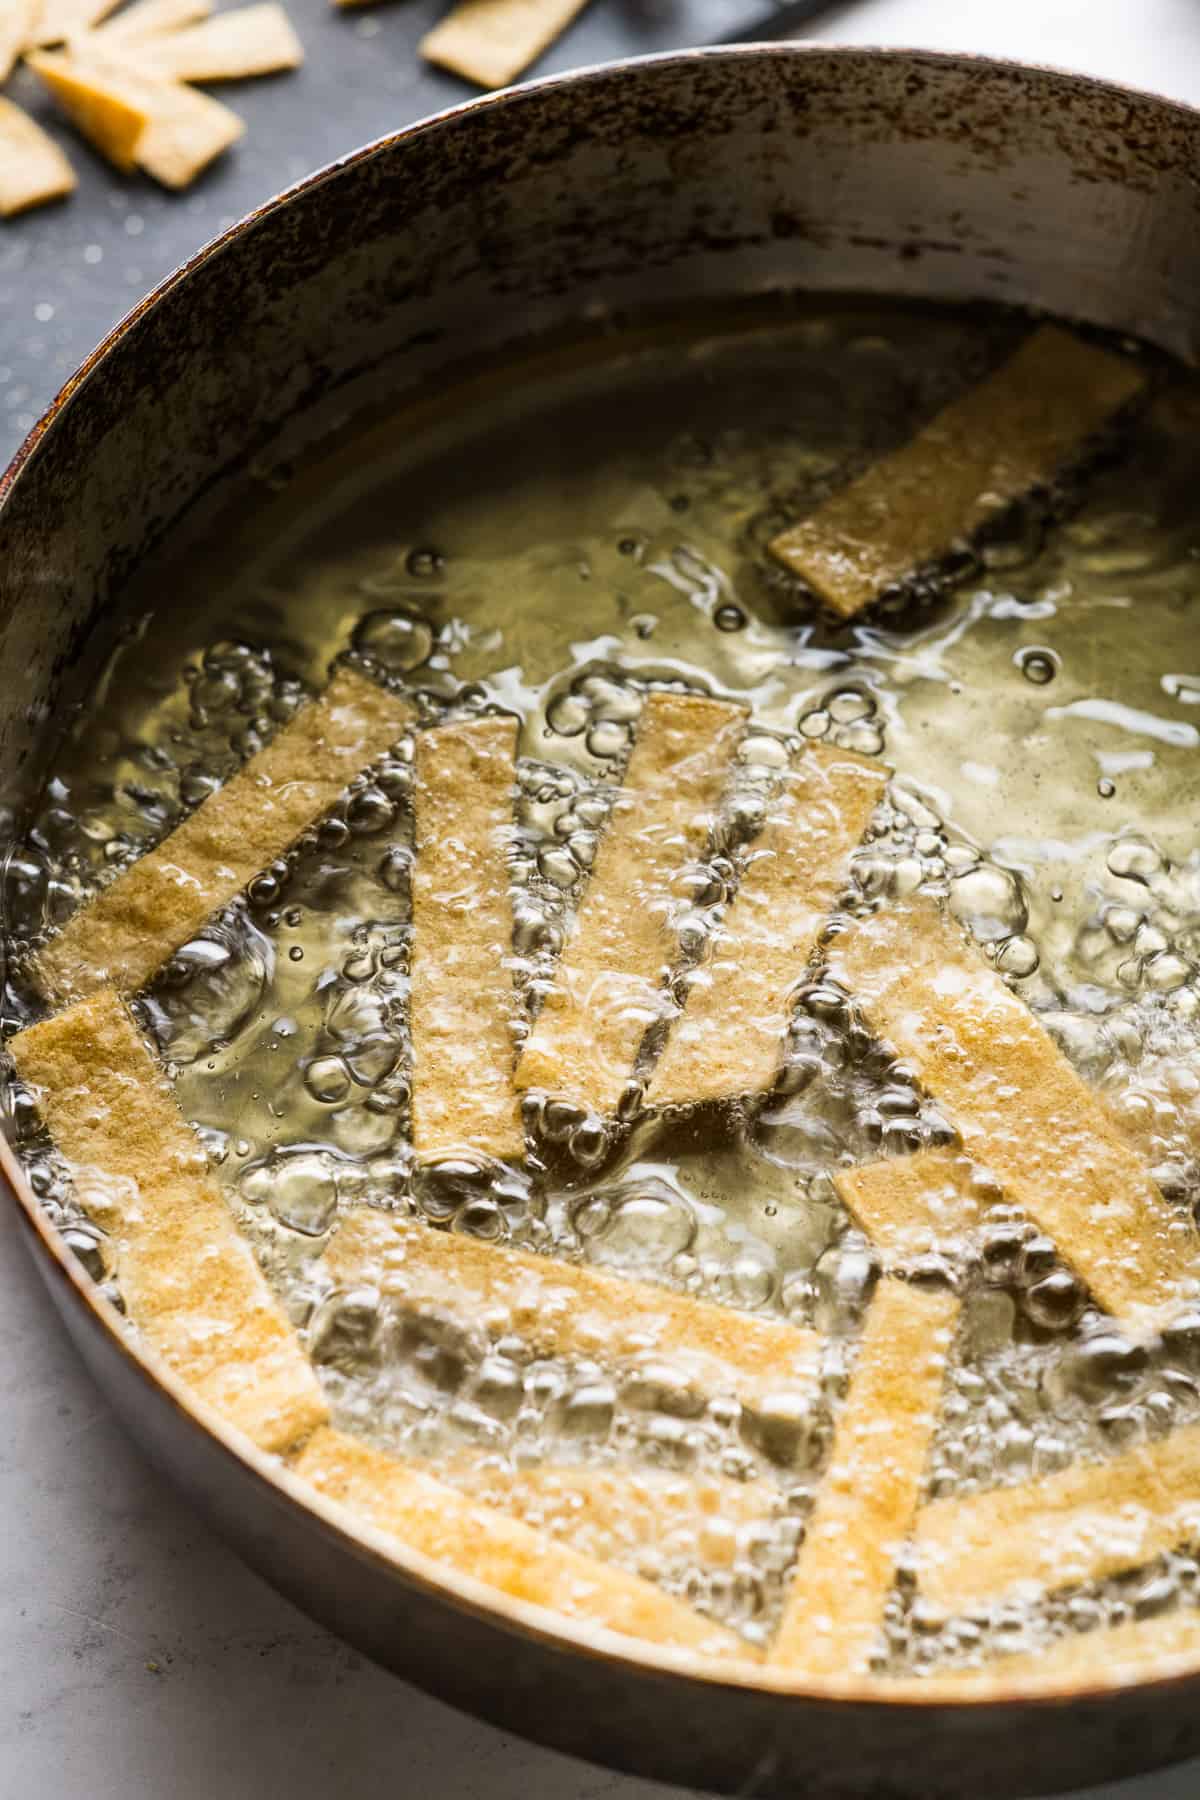 Tortilla strips being fried in a pan.